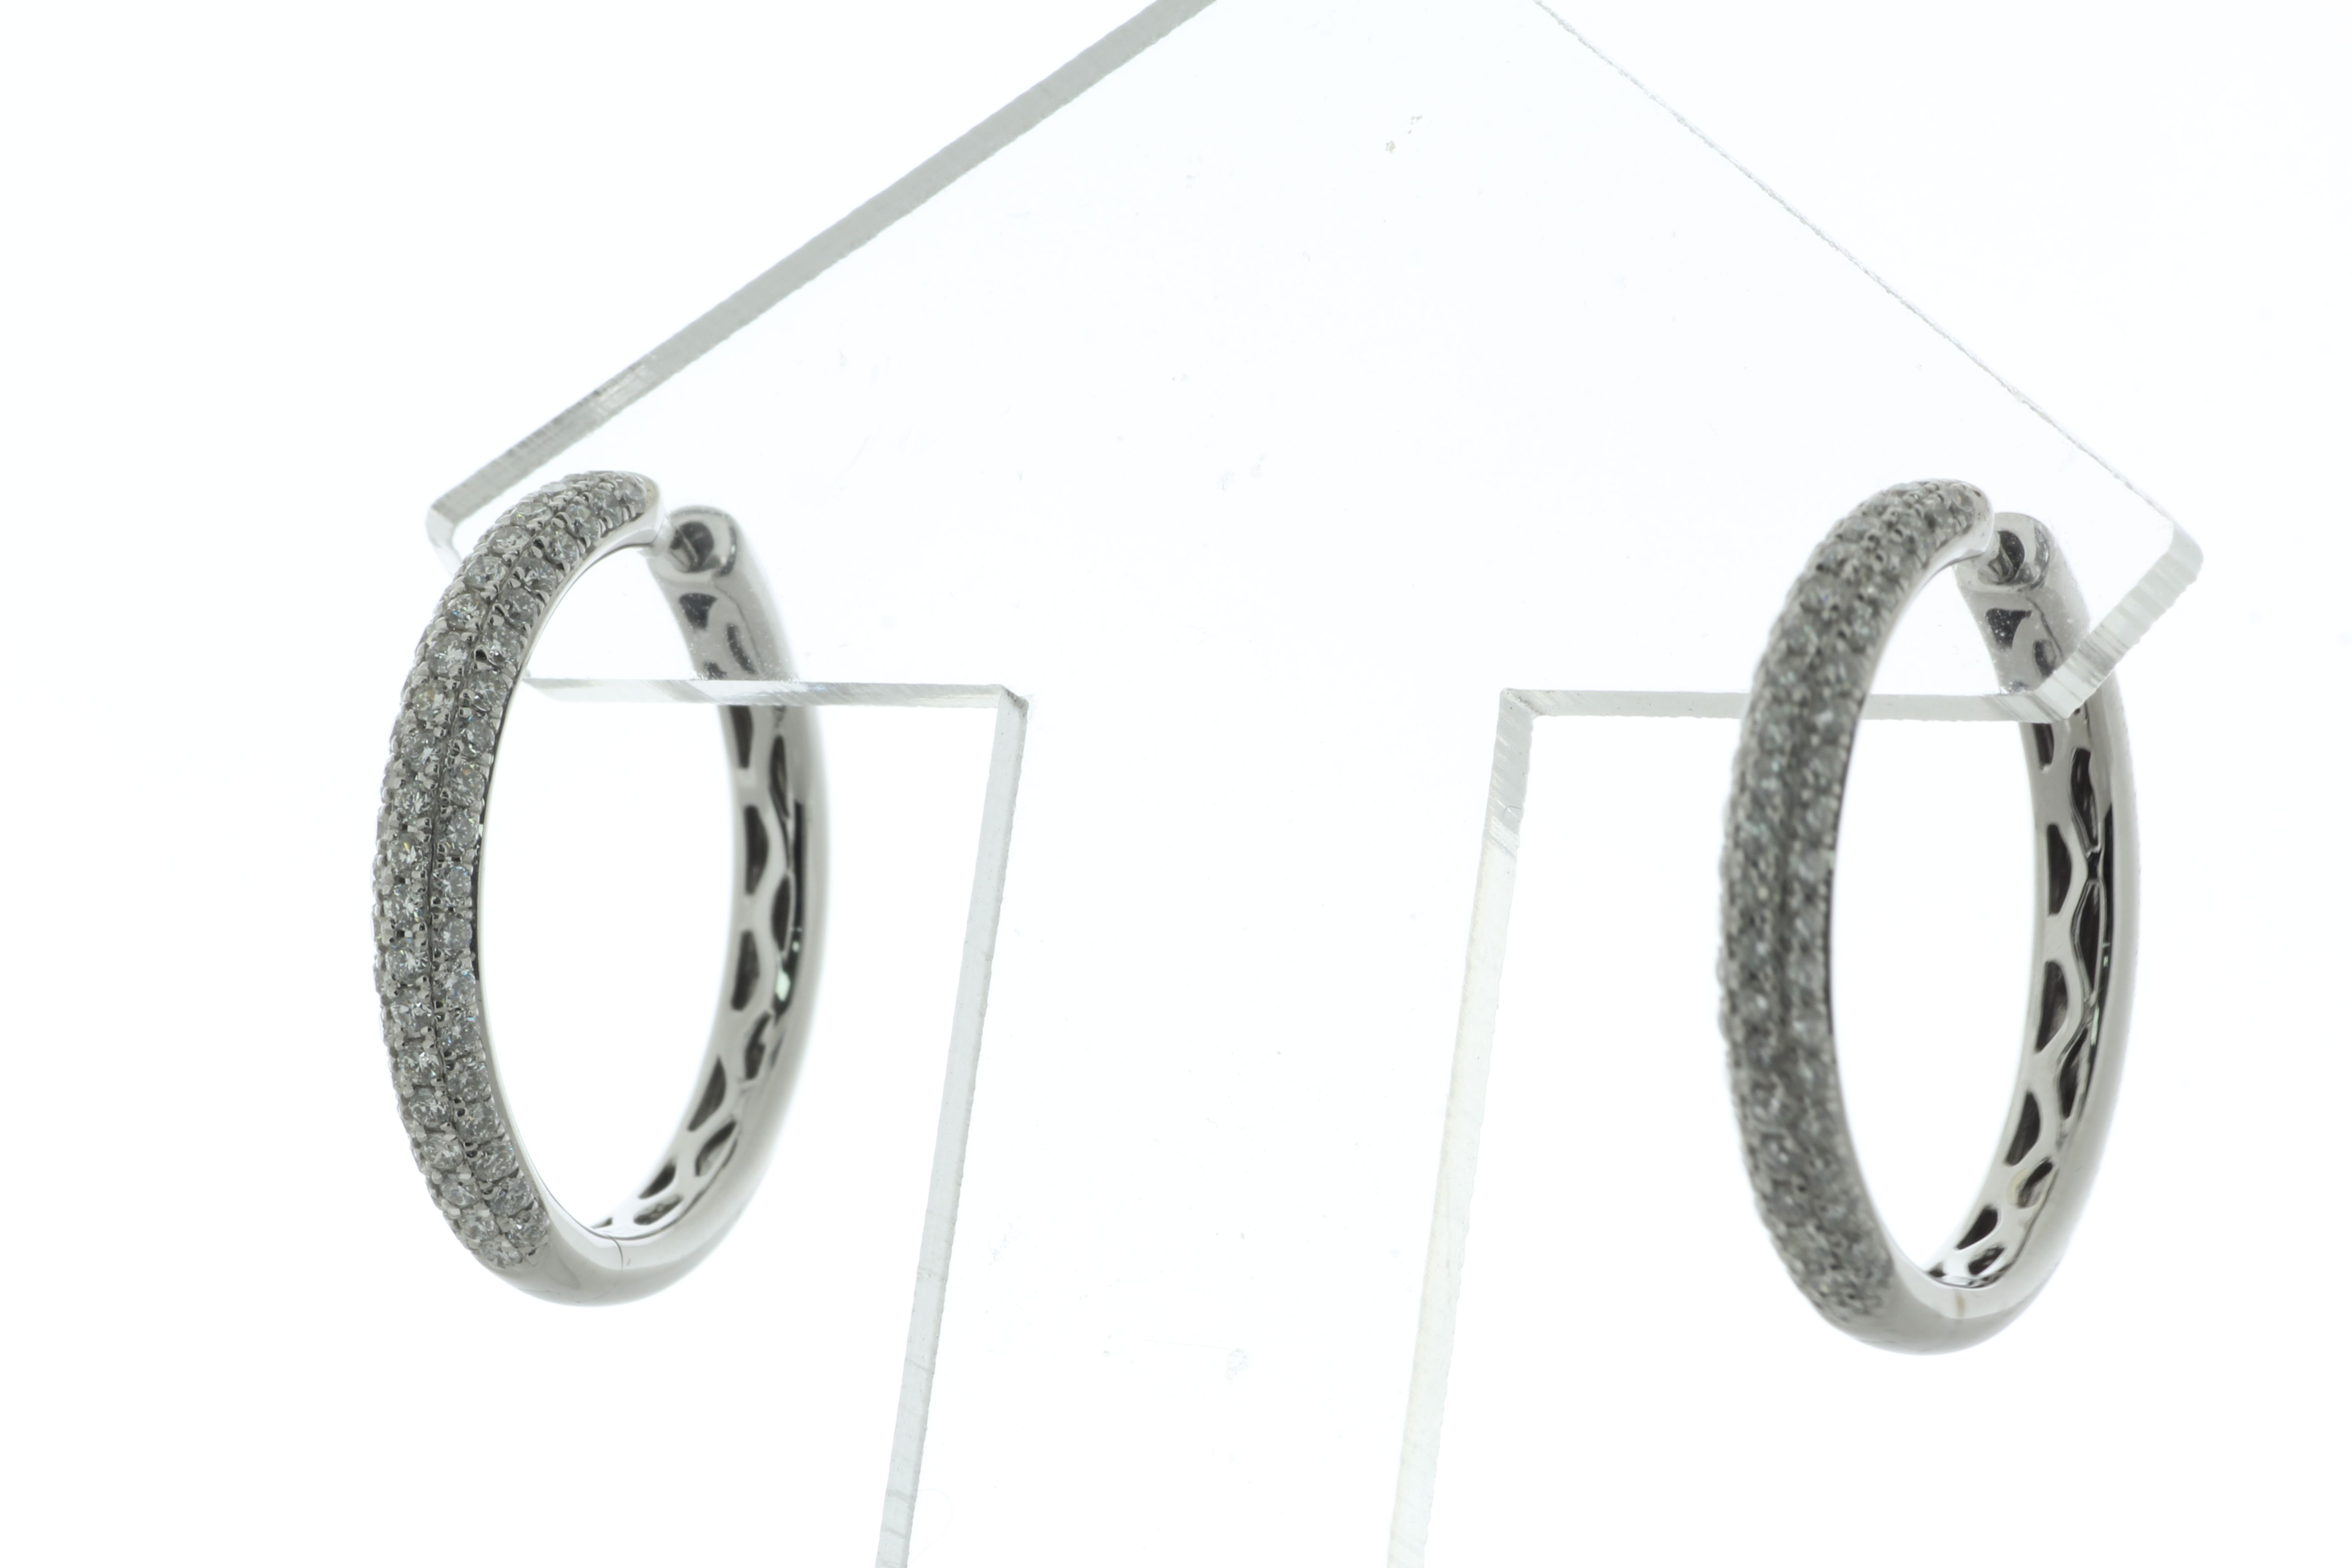 18ct White Gold Claw Set Hoop Diamond Earring 0.97 Carats - Image 2 of 4